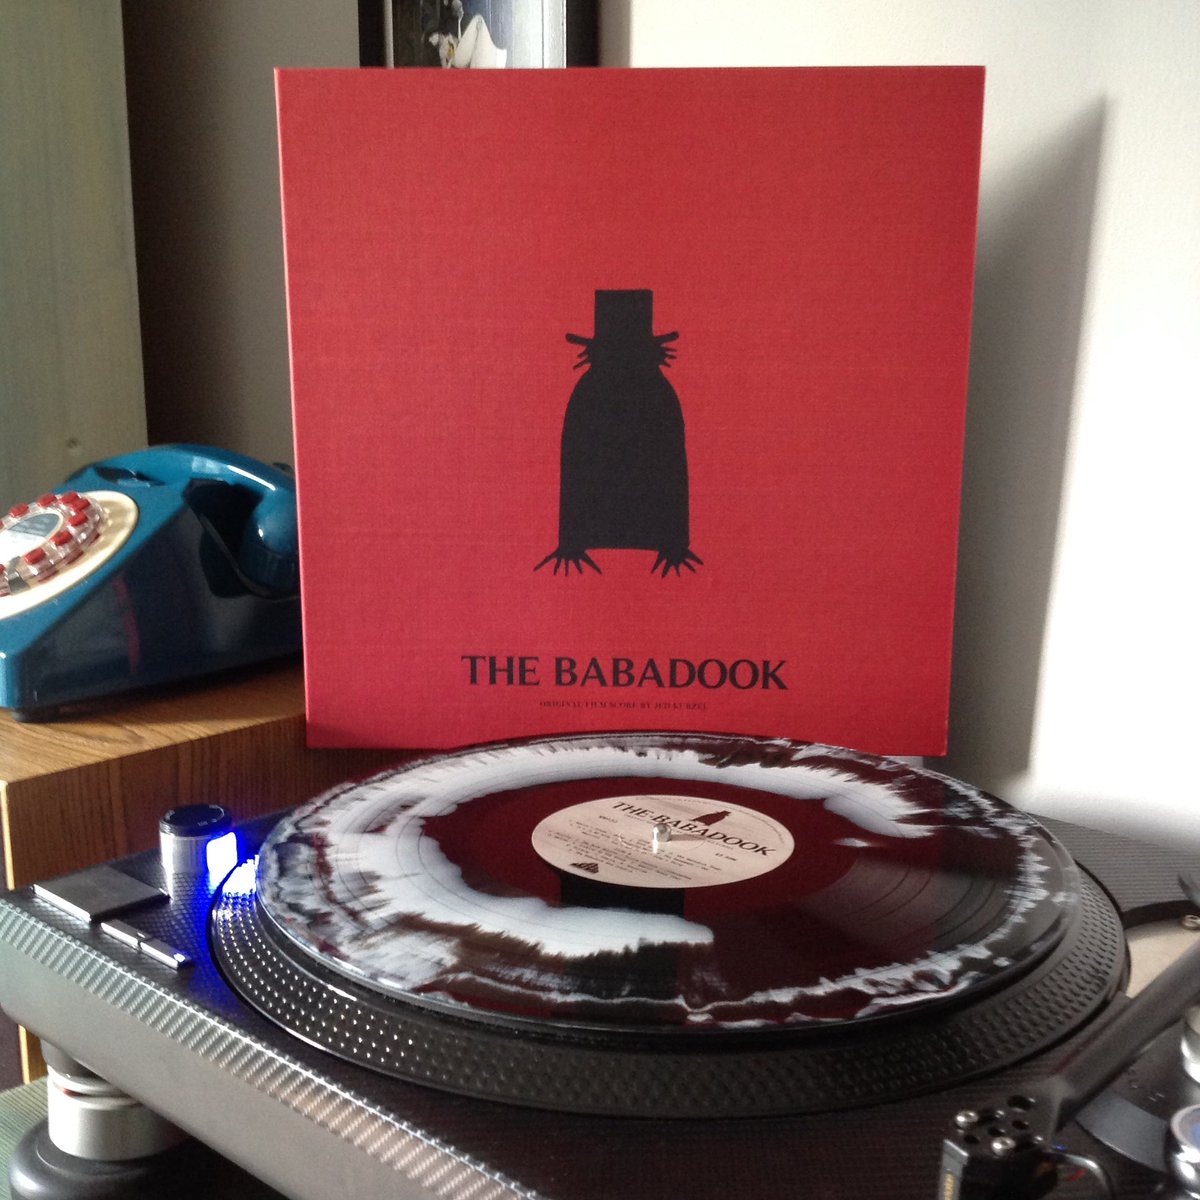 Creeping out the missus on this fine morn. @waxworkrecords #jedkurzel #thebabadook